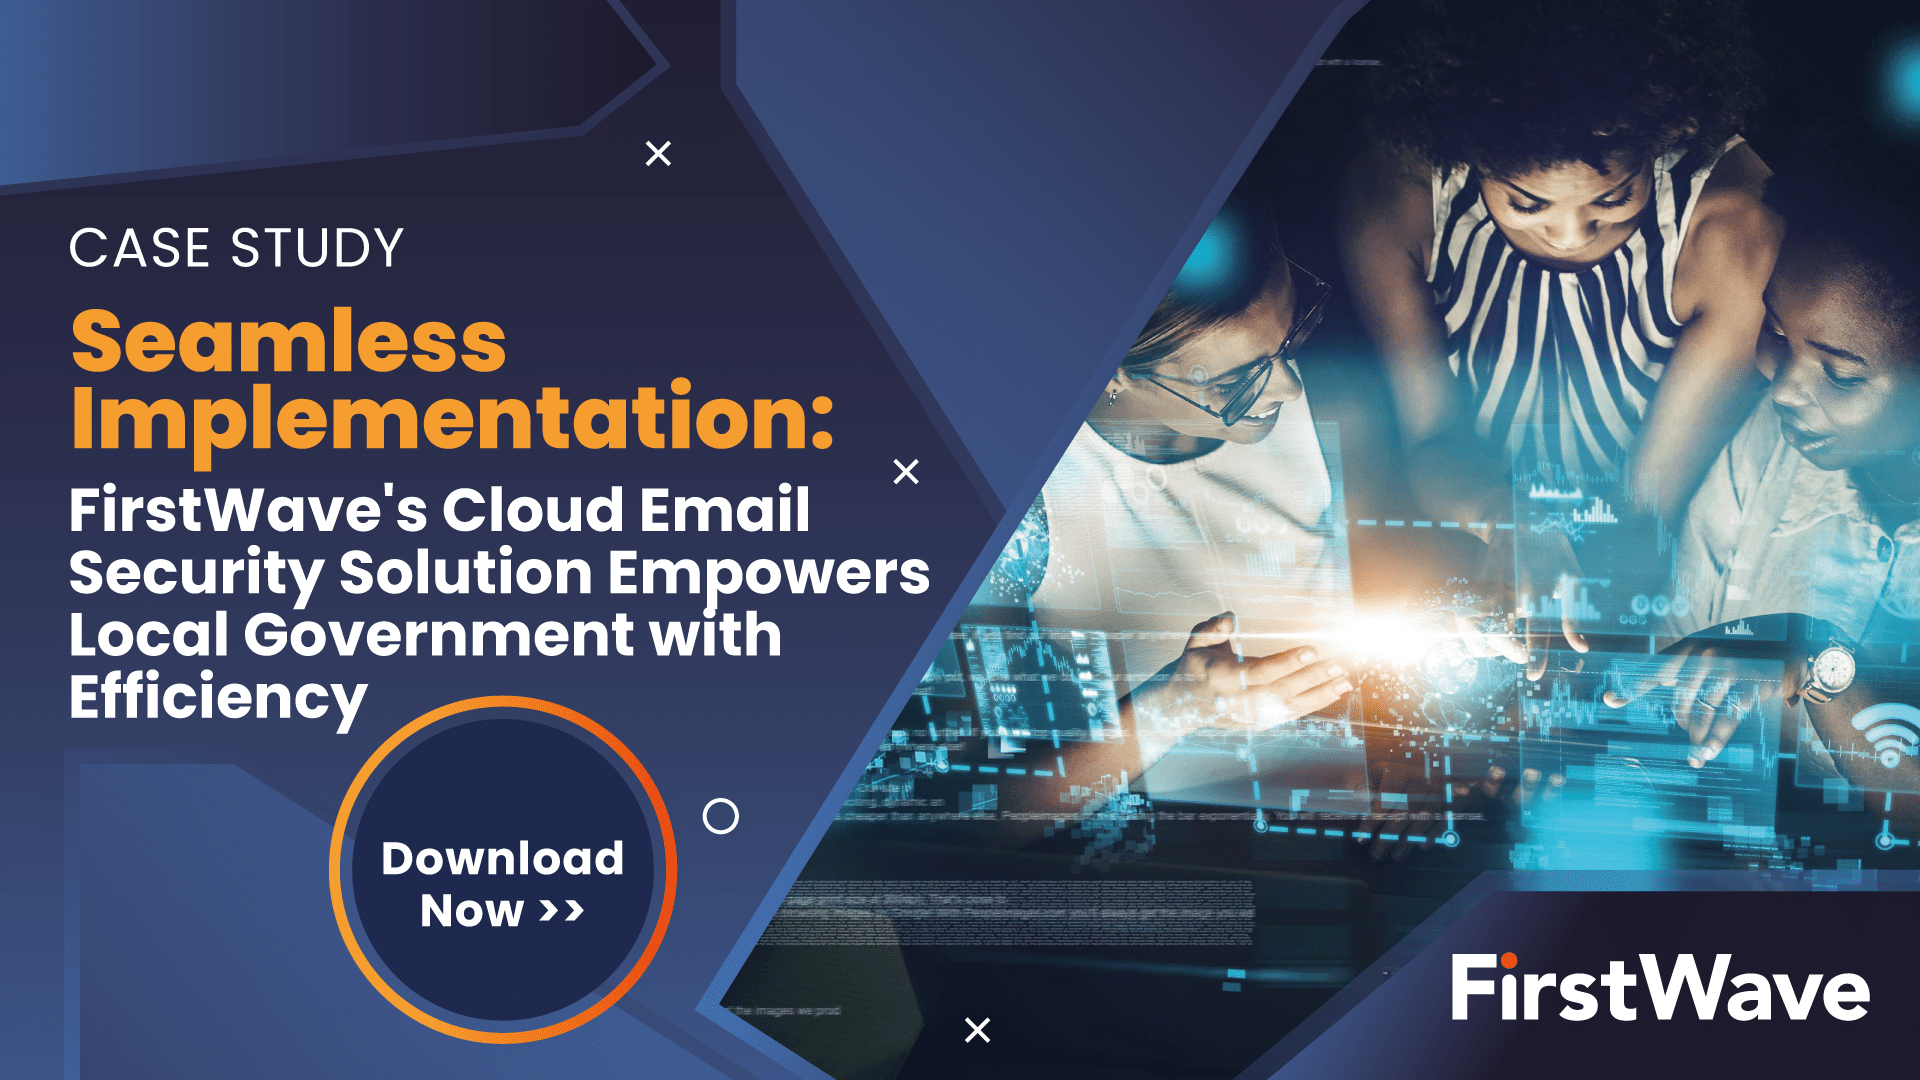 [Case Study] Easy & Quick Deployment of An Efficient Cloud Email Security Solution